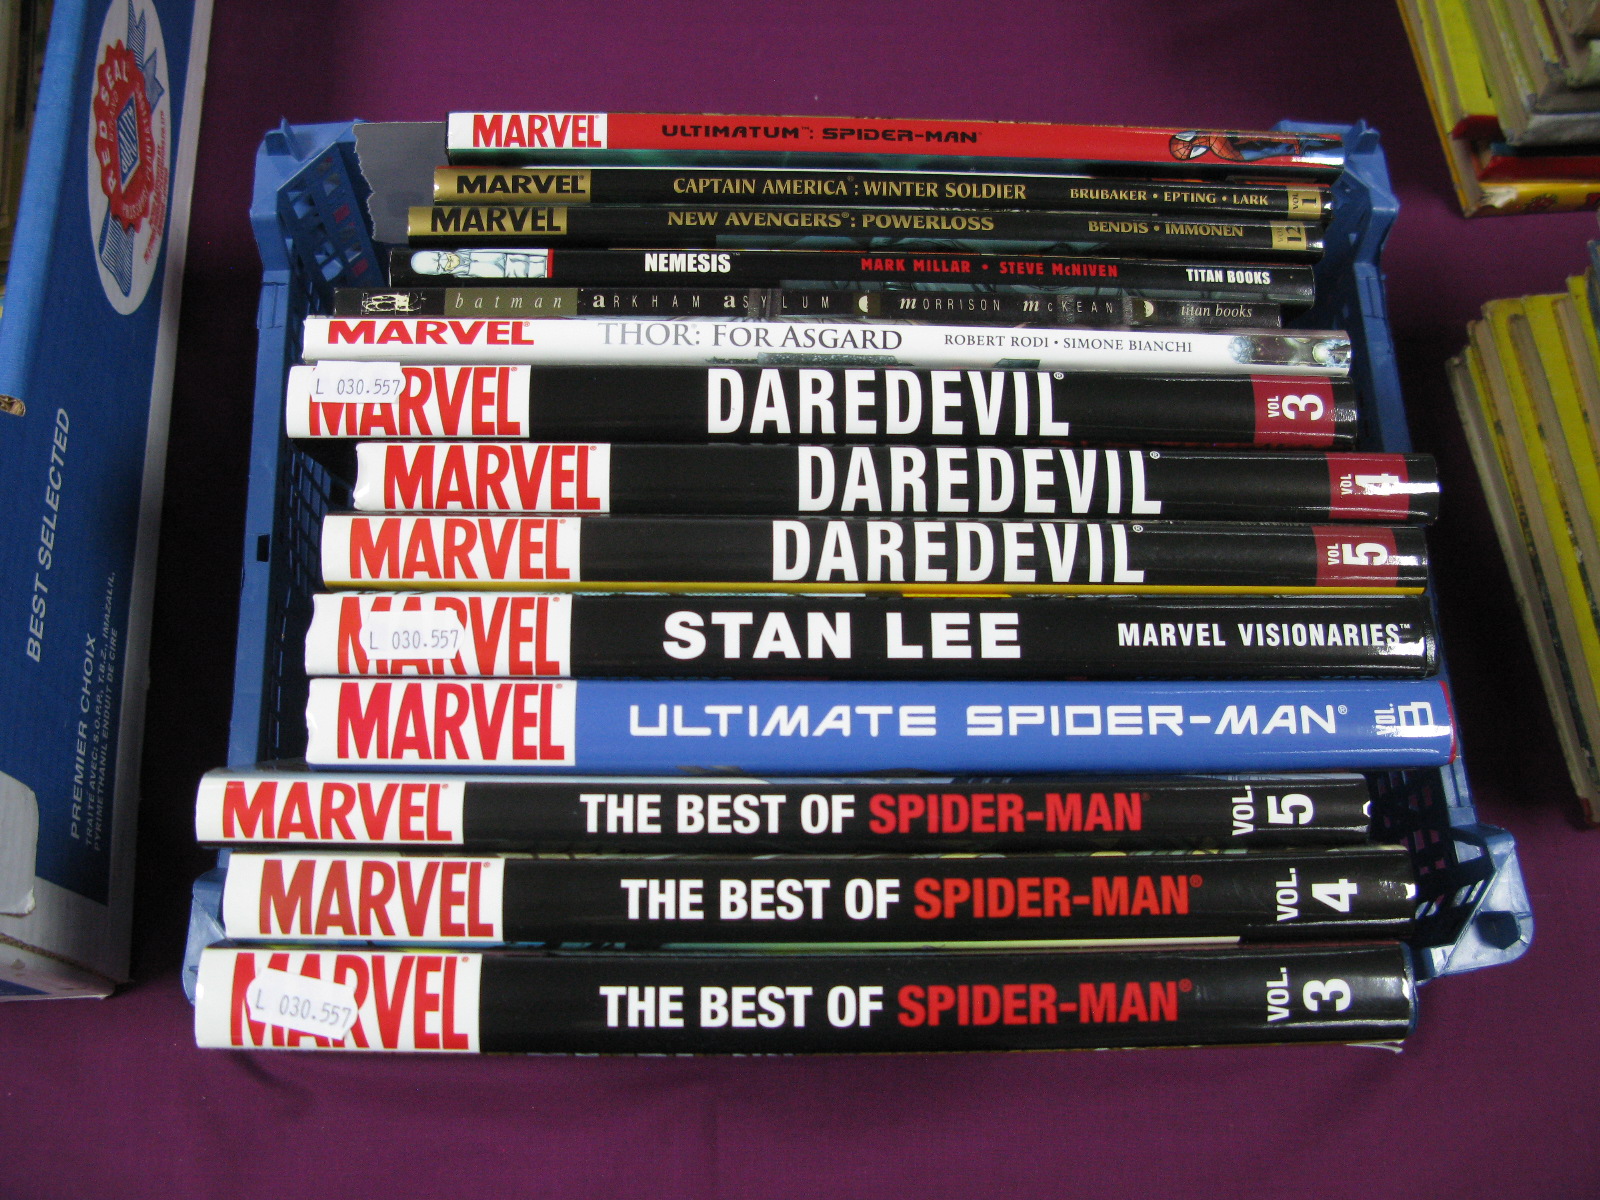 A Collection of Modern Hard Cover Comic Books, by Marvel, Titan Books including Marvel Visionaires -